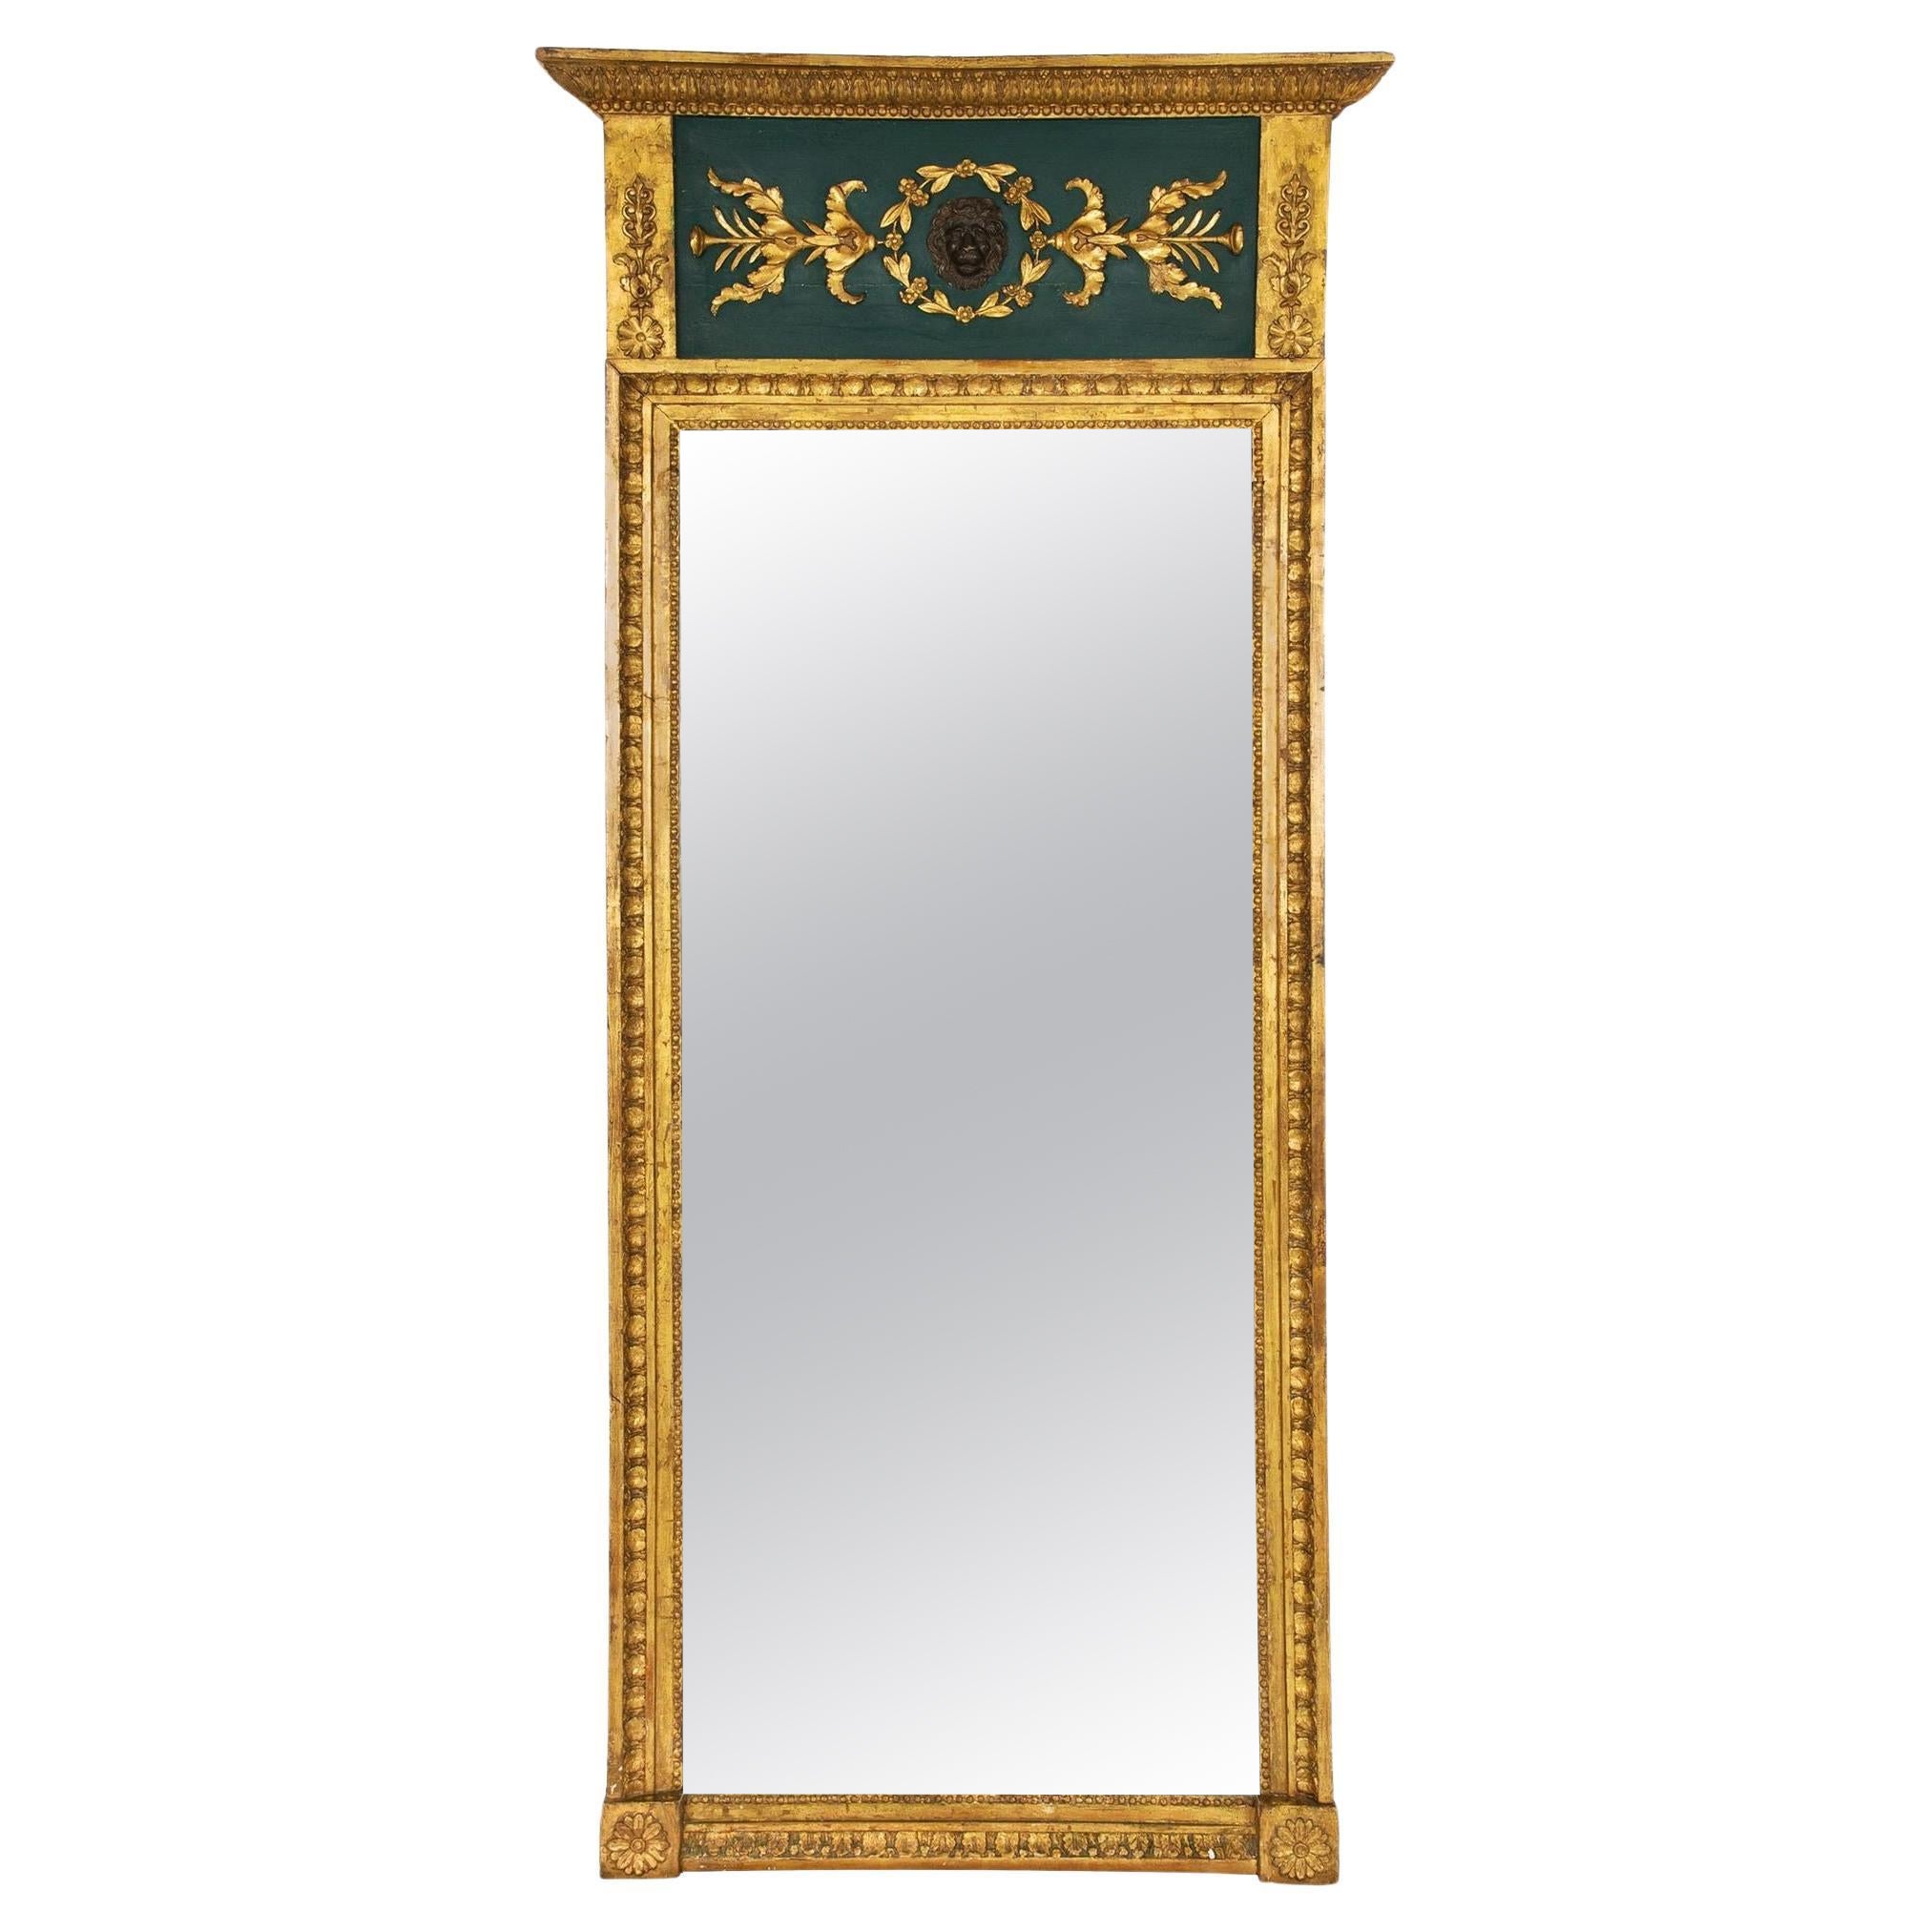 Regency Period Gilded Pier Mirror with Lion’s Mask, early 19th century For Sale